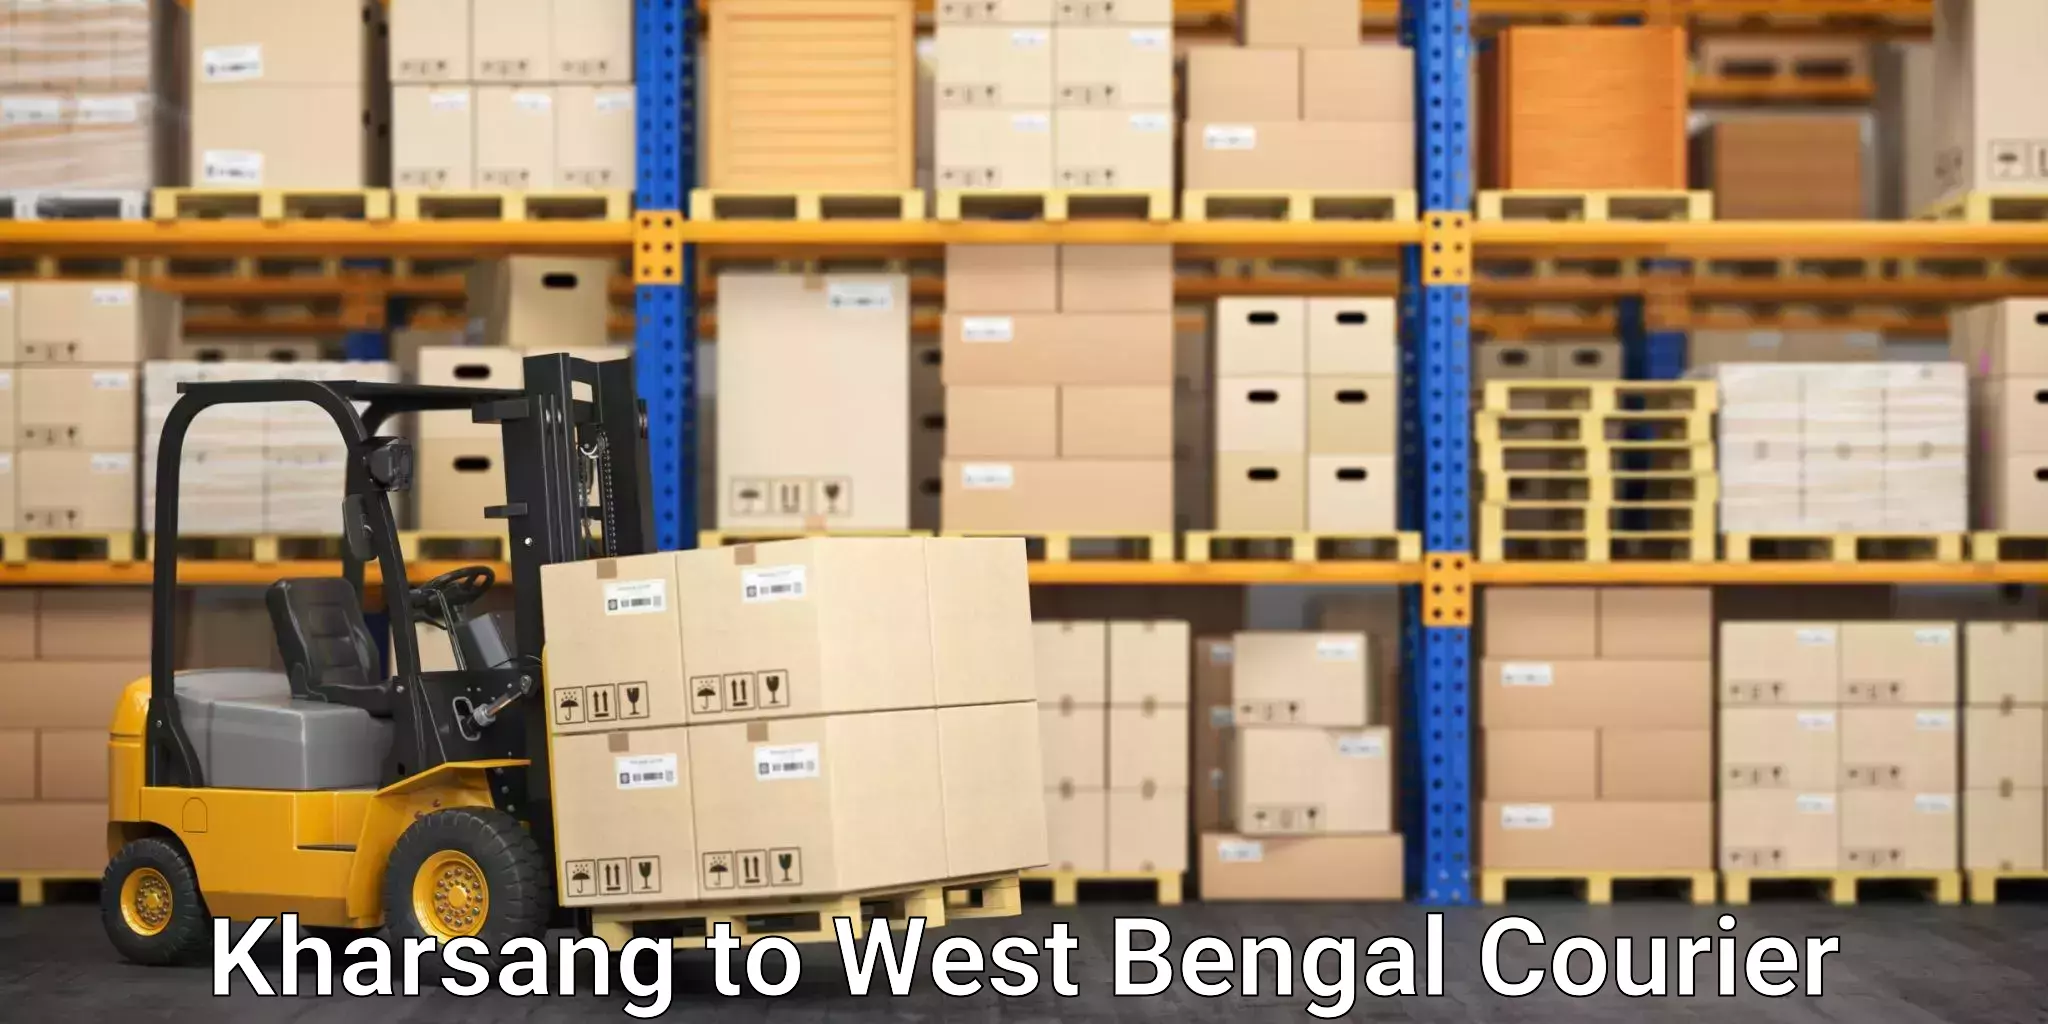 Reliable shipping partners Kharsang to West Bengal